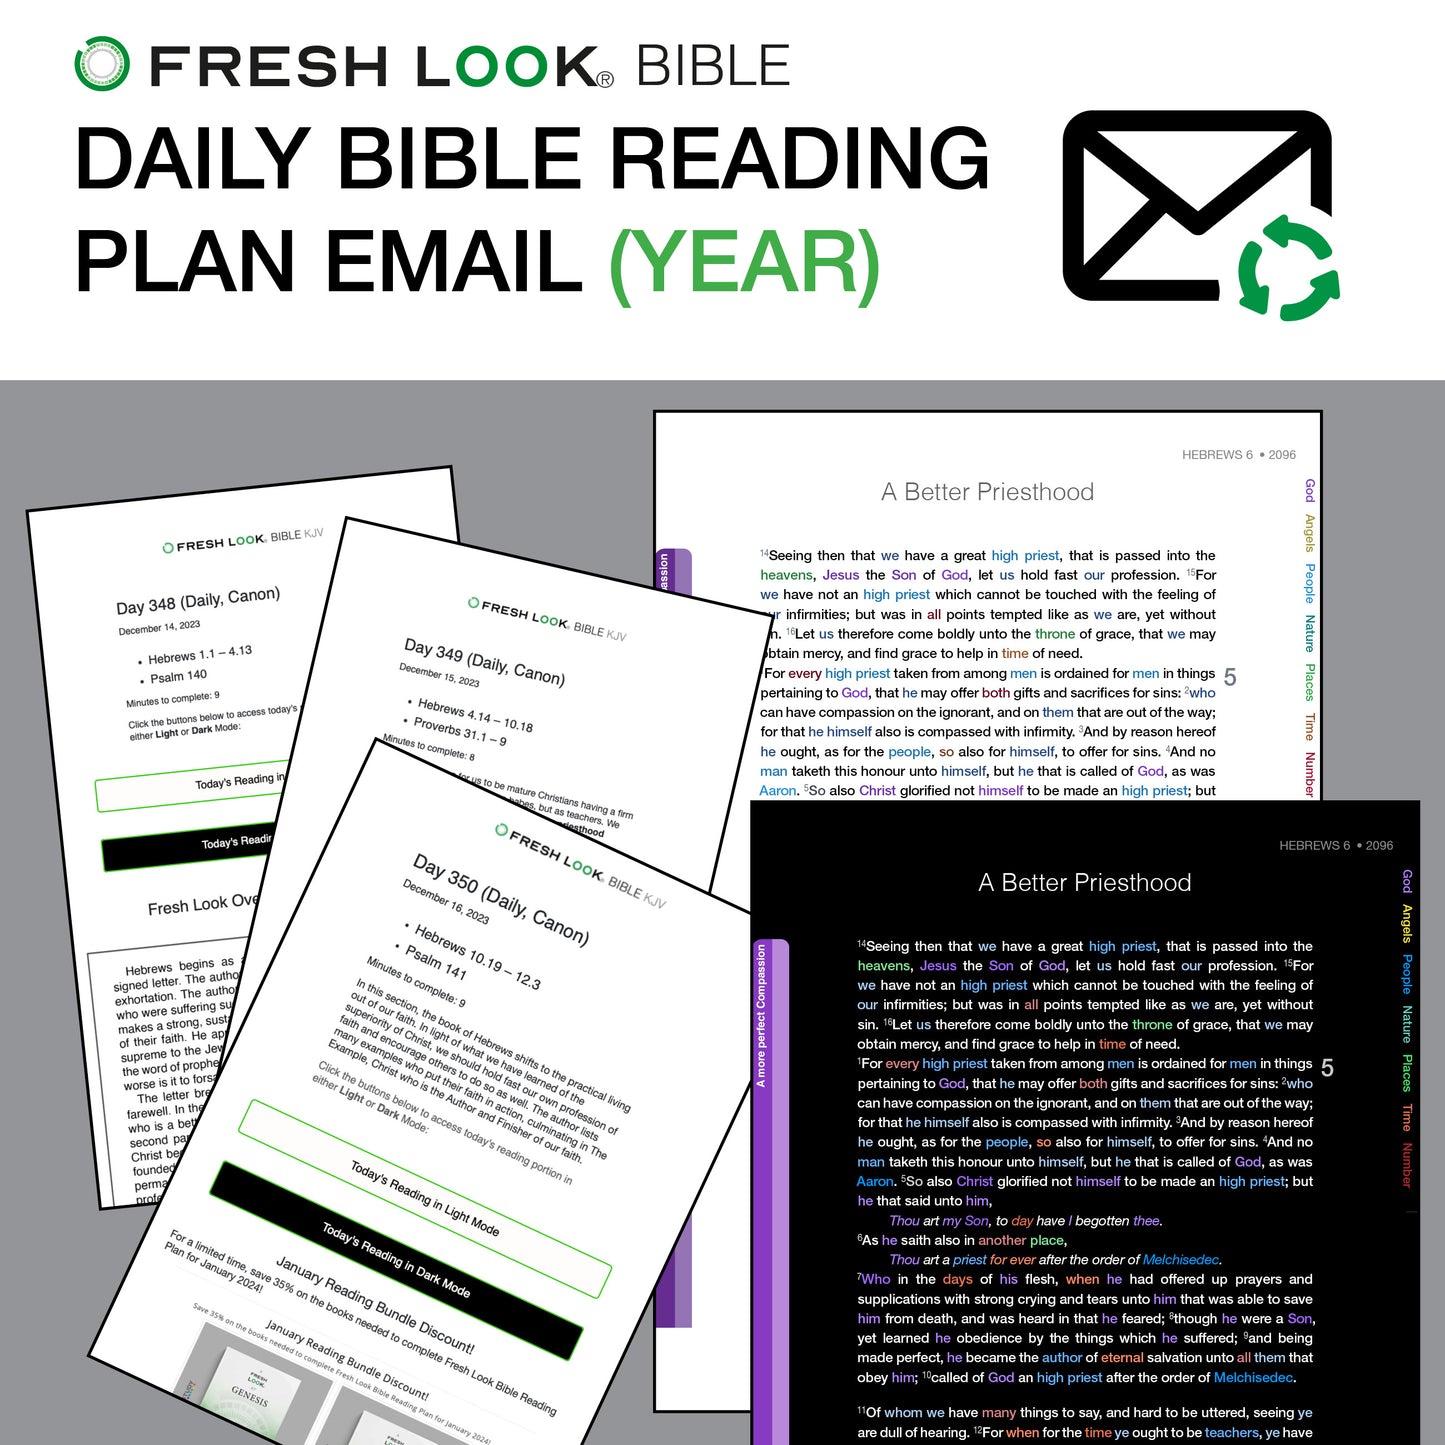 Daily Bible Reading Plan Email [Year]